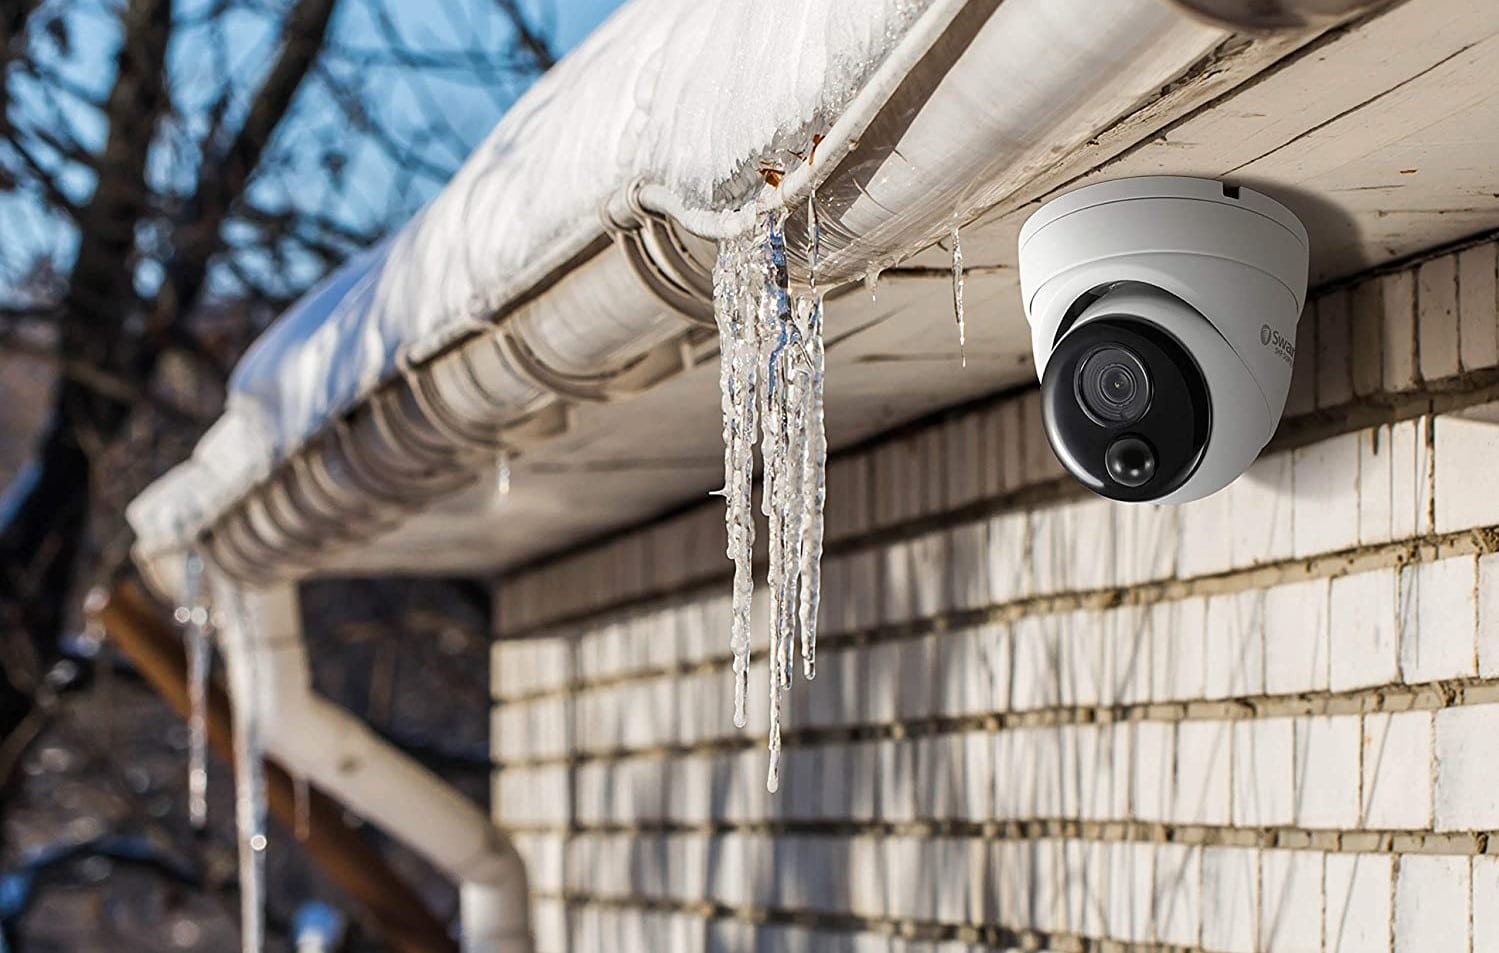 Home Security Tips: Set Up Security Cameras